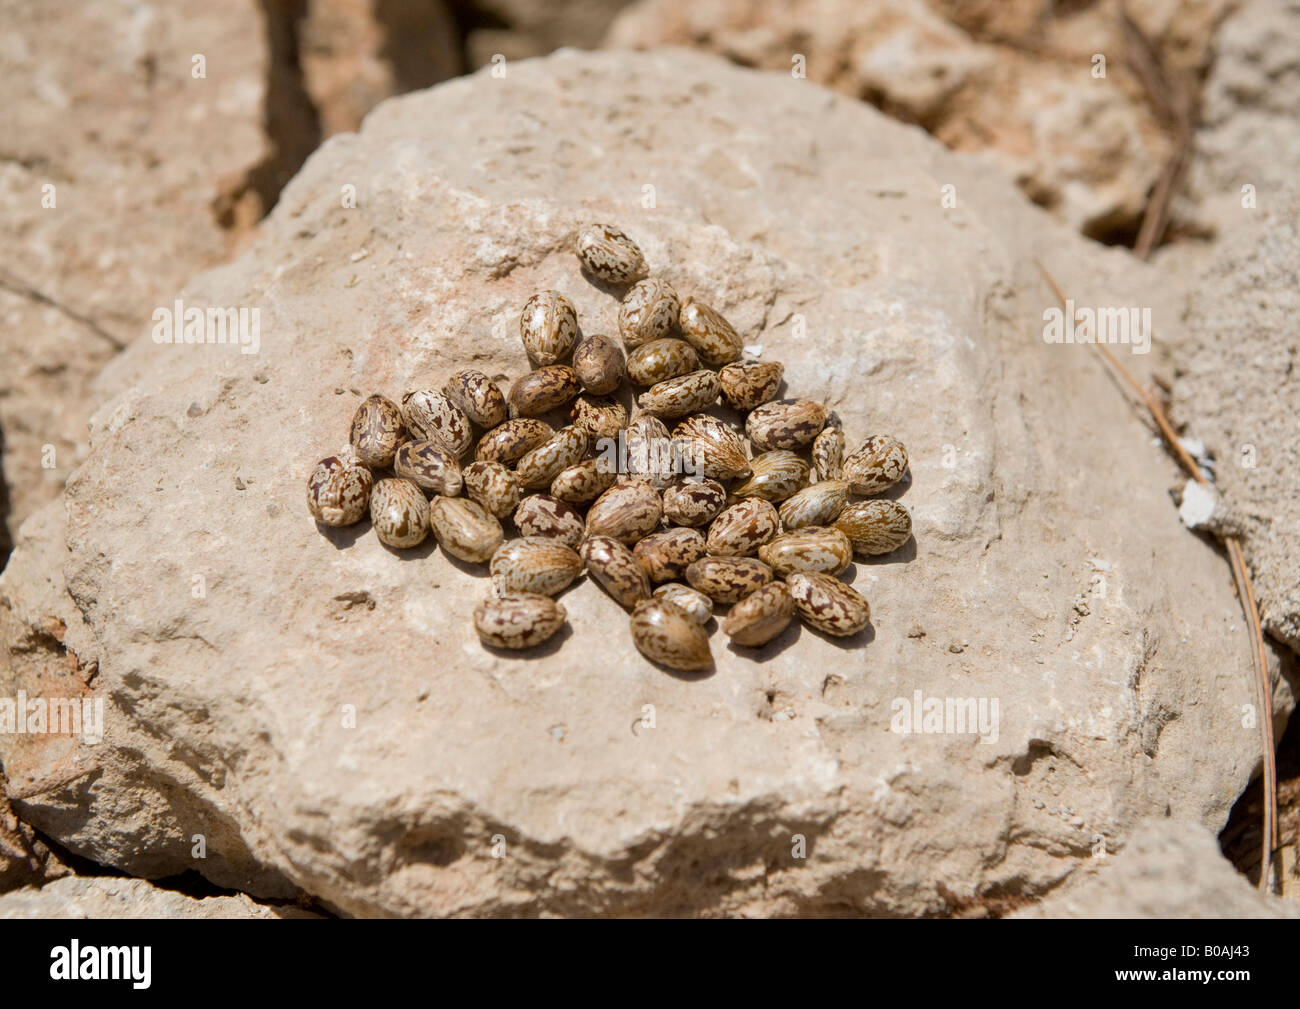 Castor oil seeds removed from dried pods which break open easily; seeds have markings and are ready to be pressed for its oil. Stock Photo